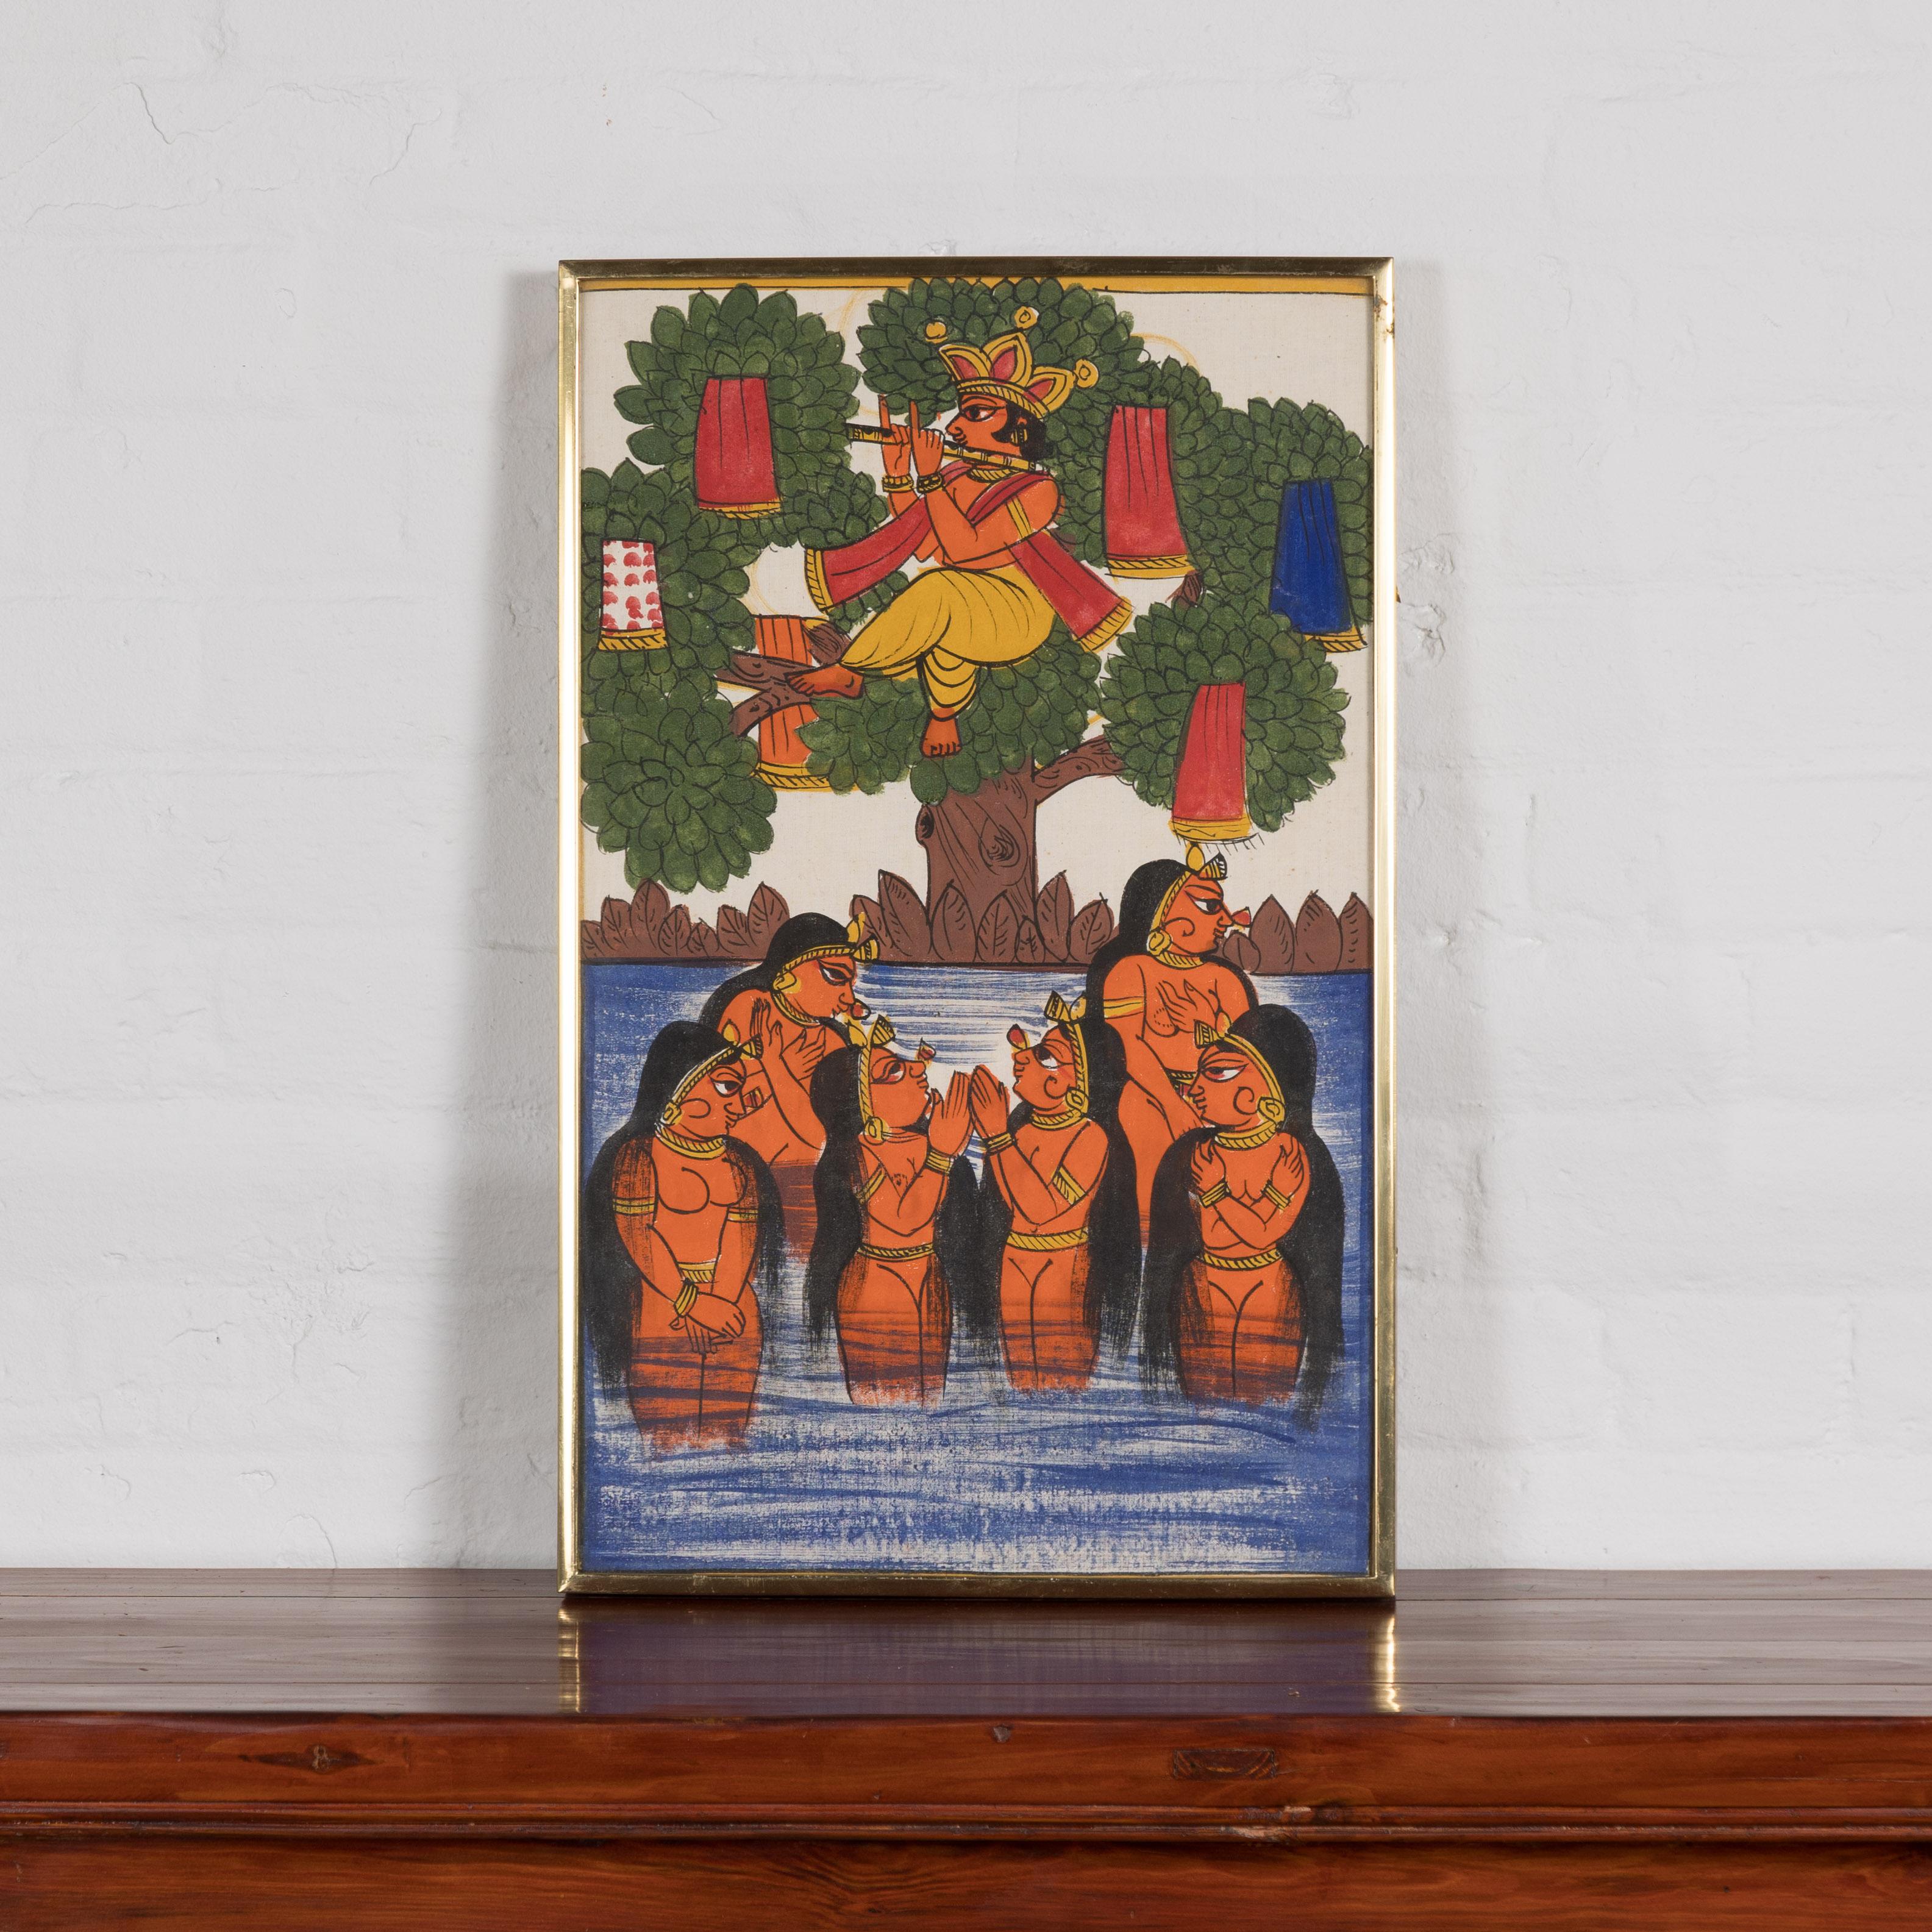 An antique Indian hand-painted folk art painting depicting six maidens and a musician. Introducing an enchanting piece of Indian heritage, an antique folk art painting that vividly captures an idyllic scene of six maidens and a musician. Beautifully